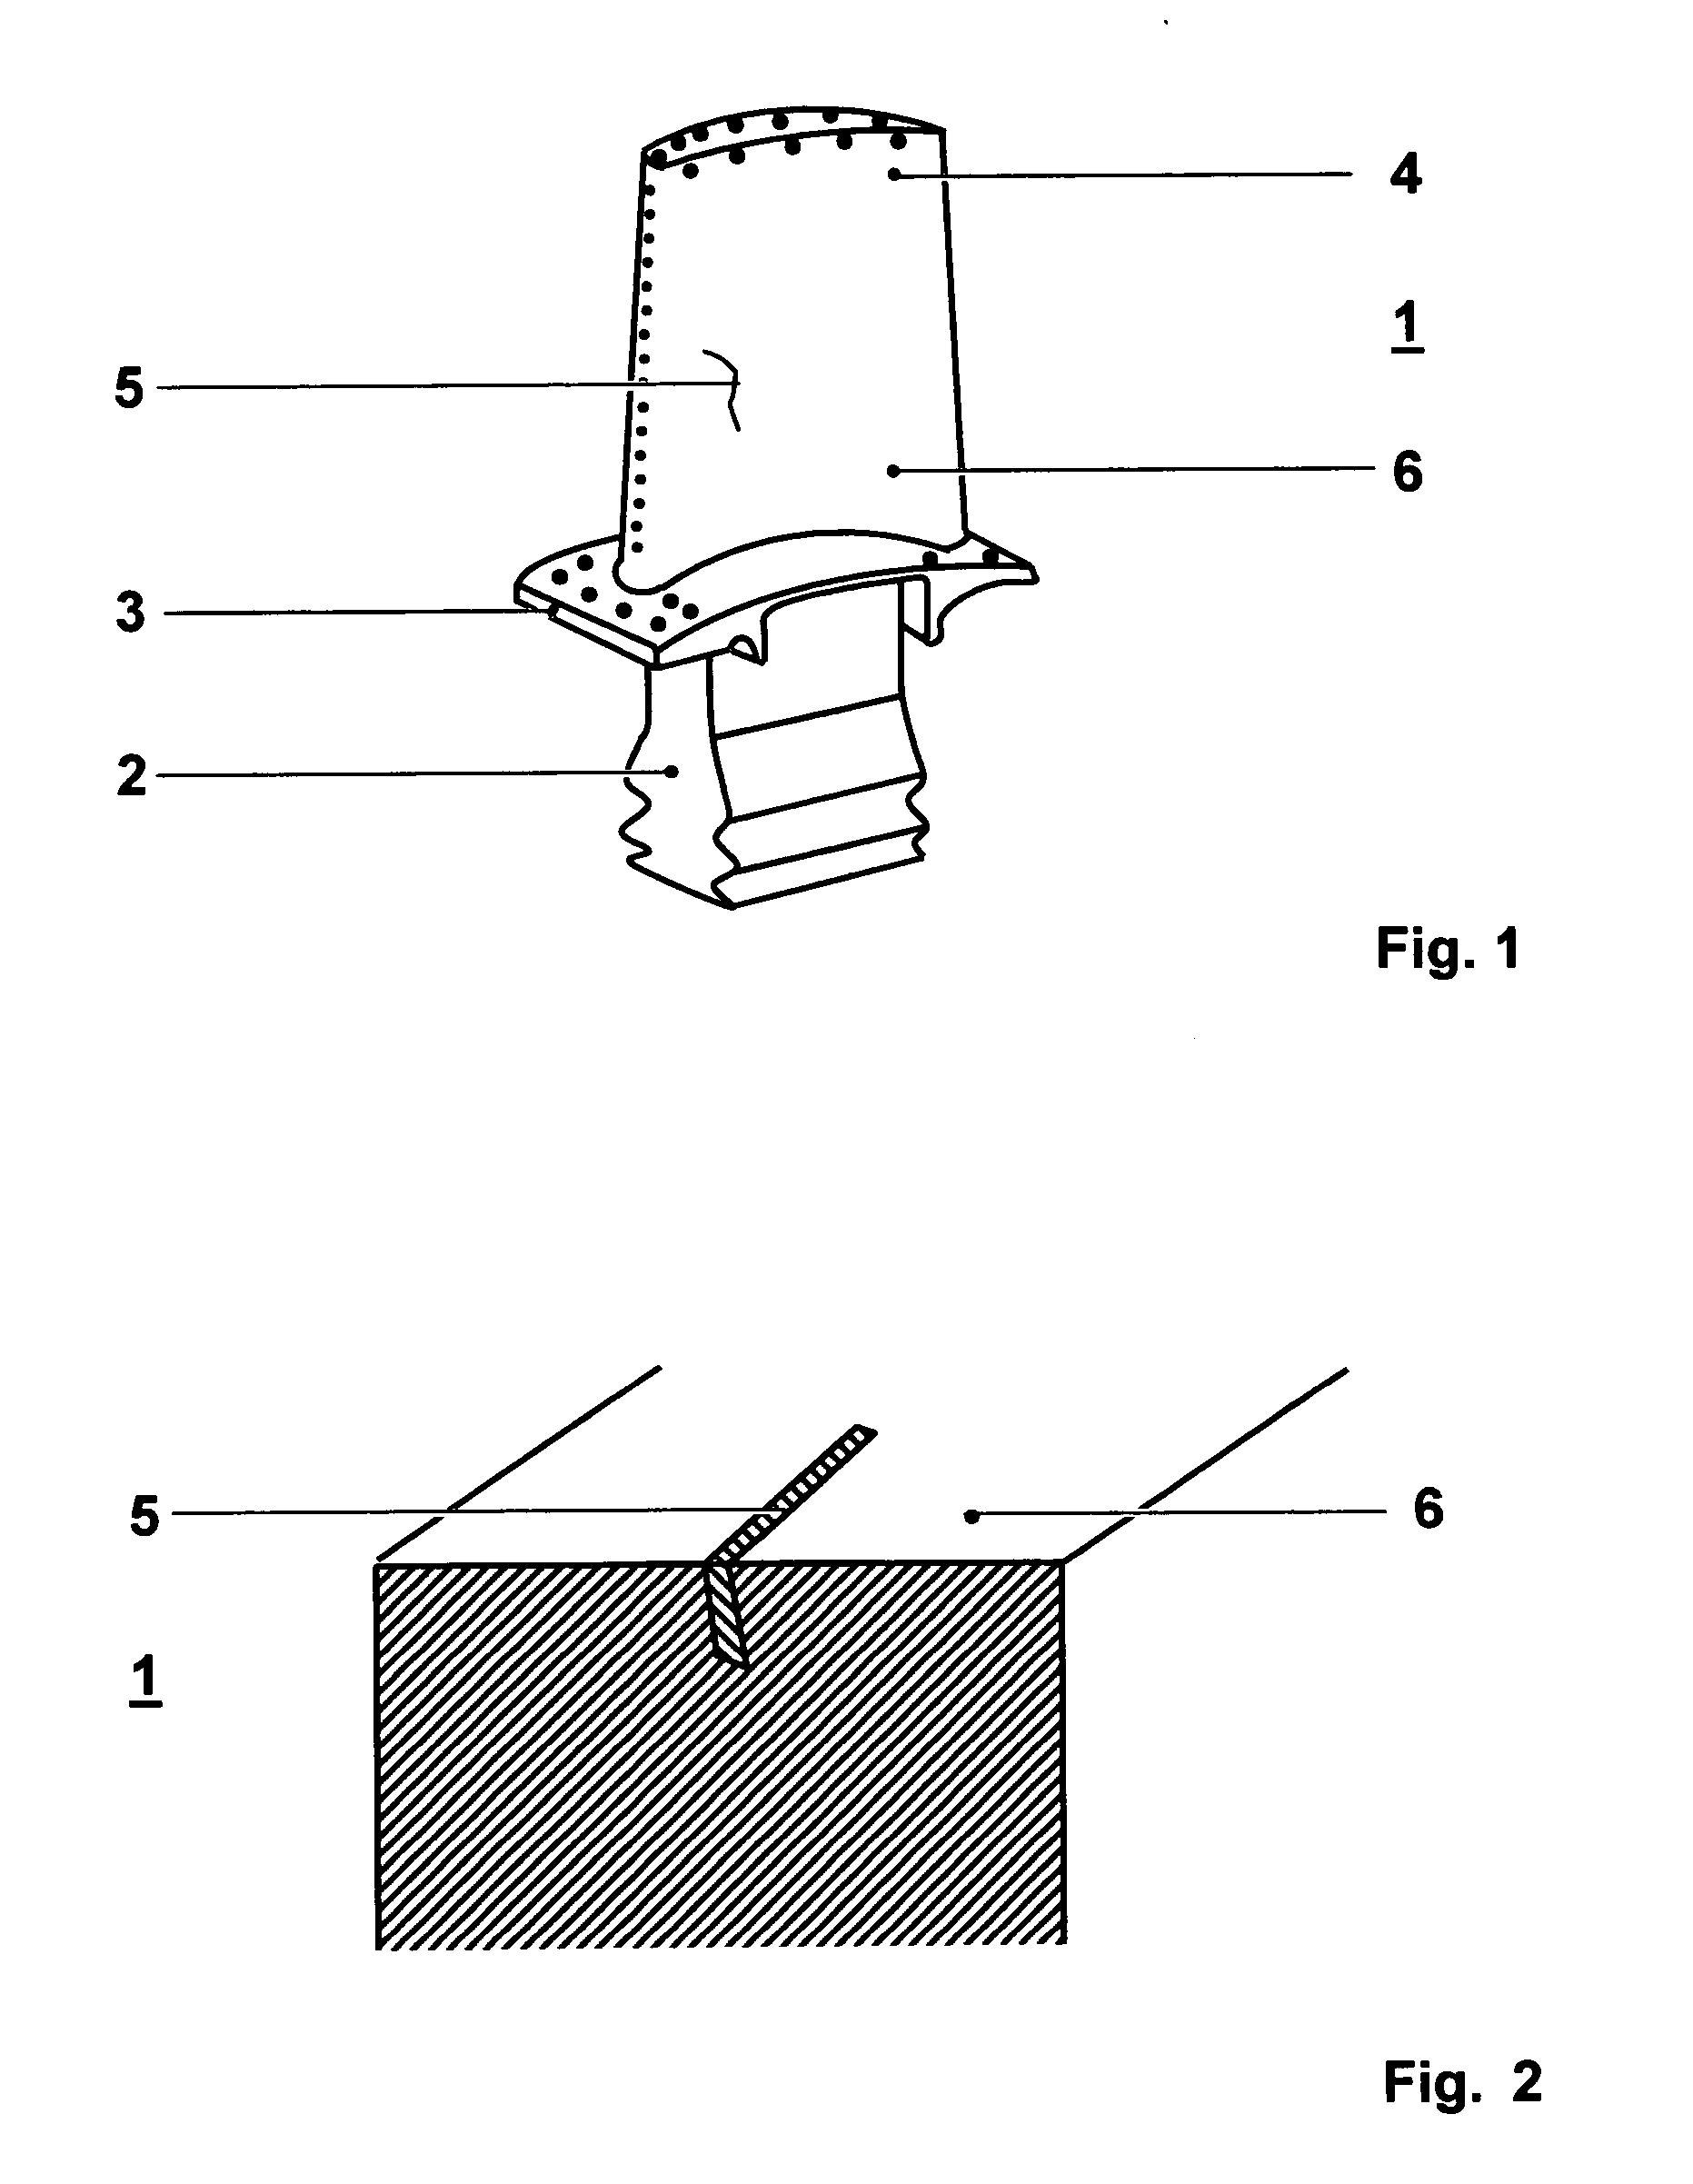 Method of removing casting defects